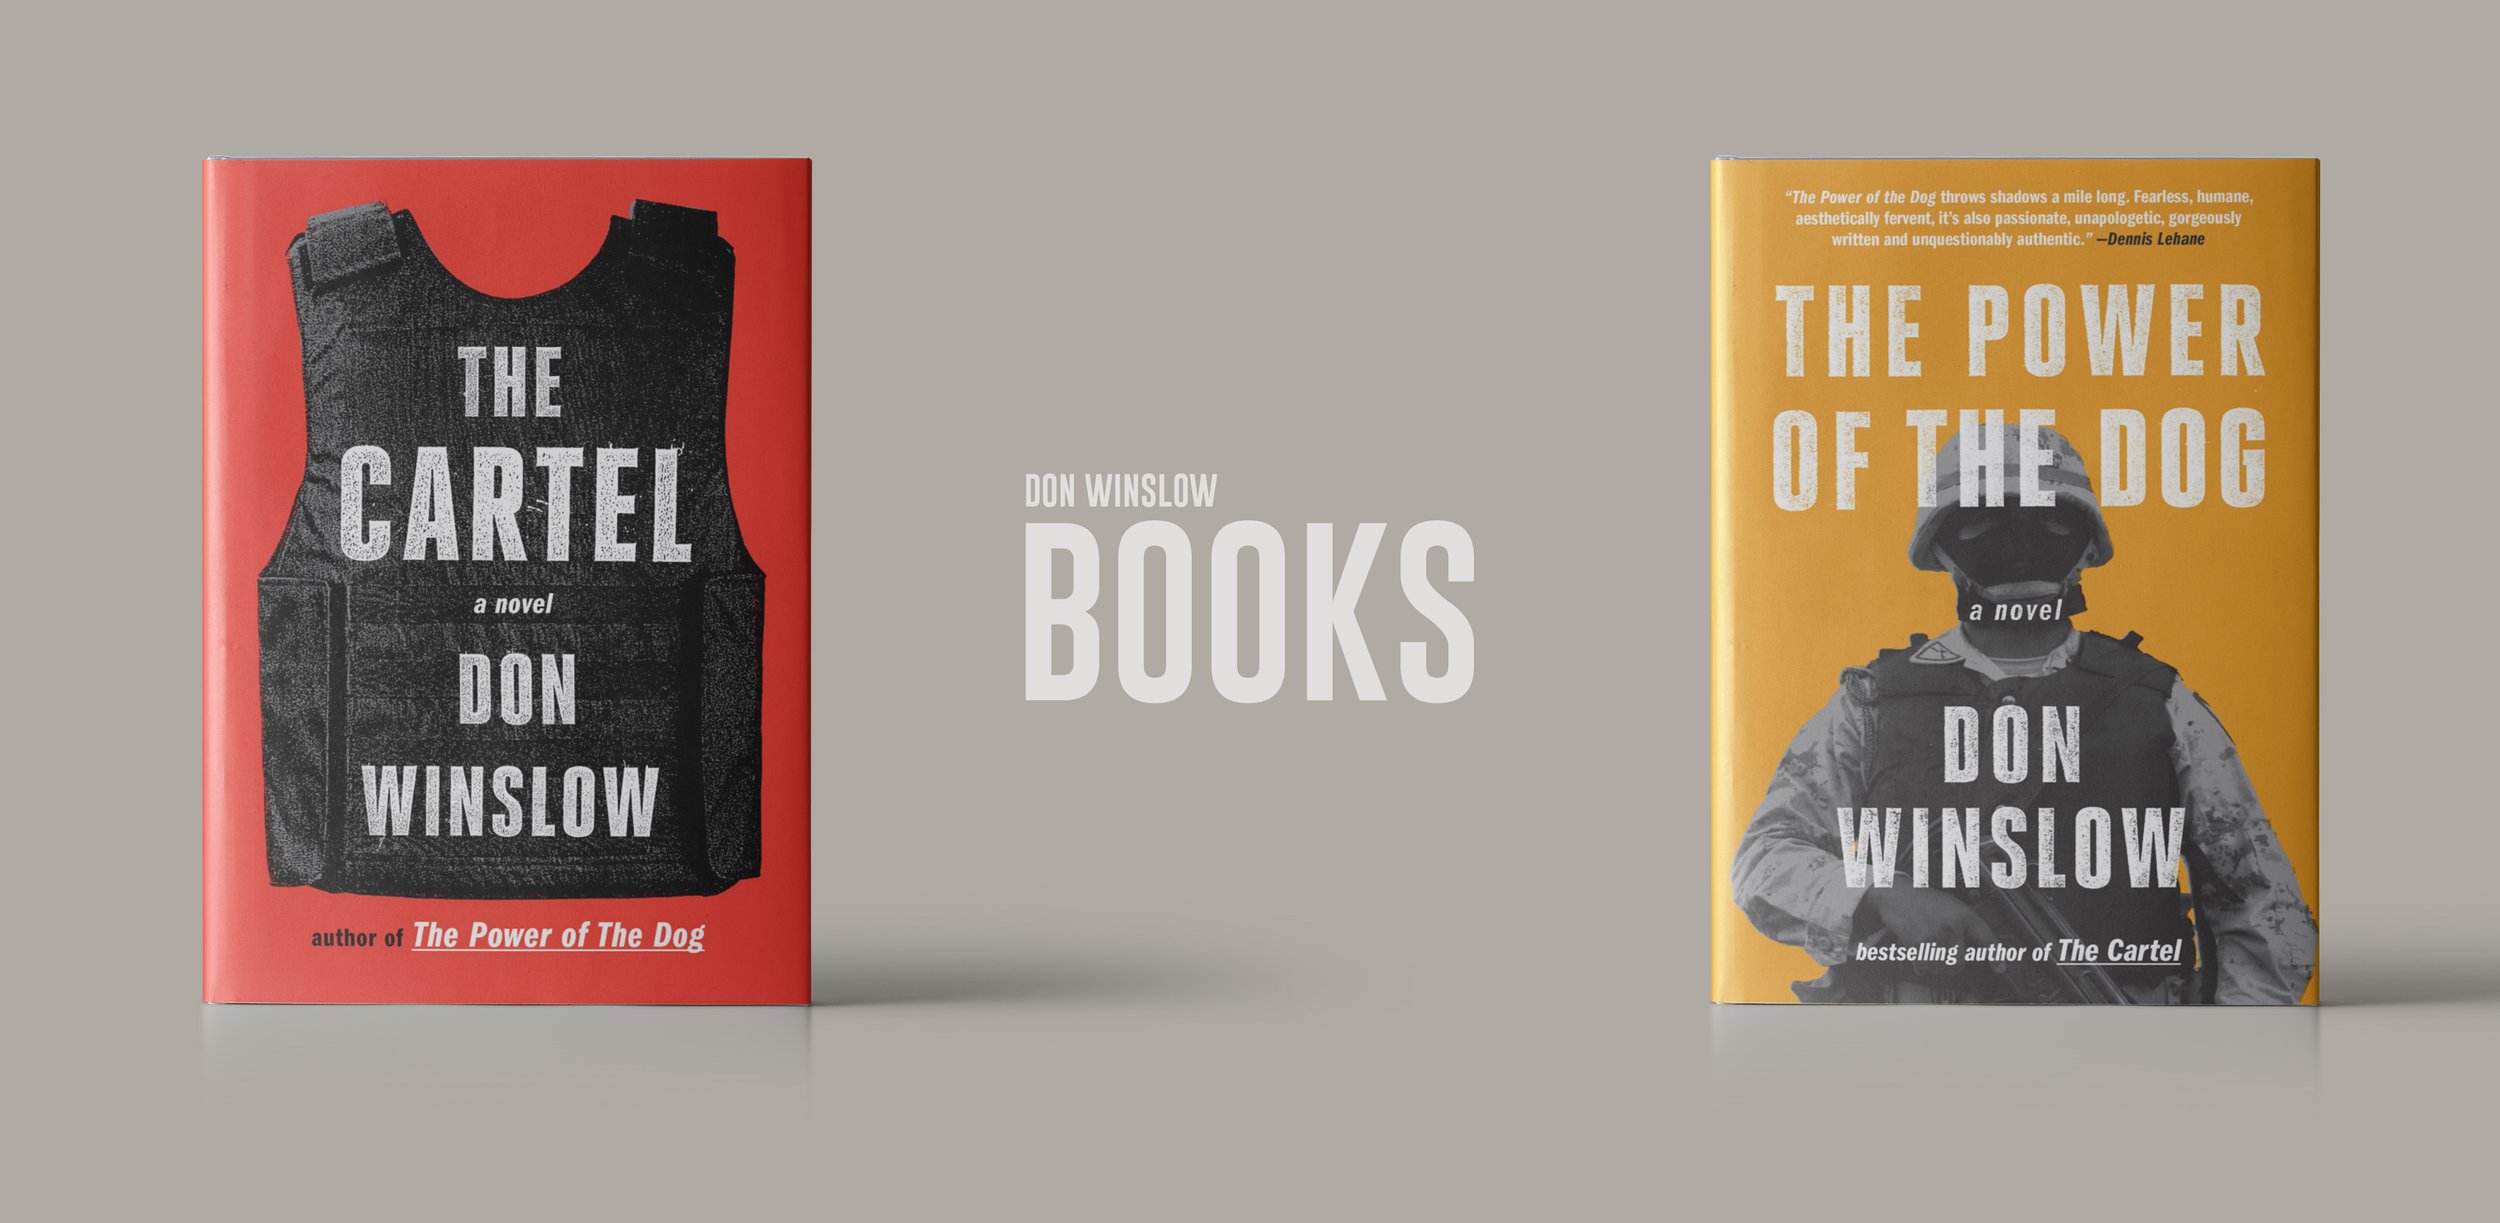 Official Website of Don Winslow